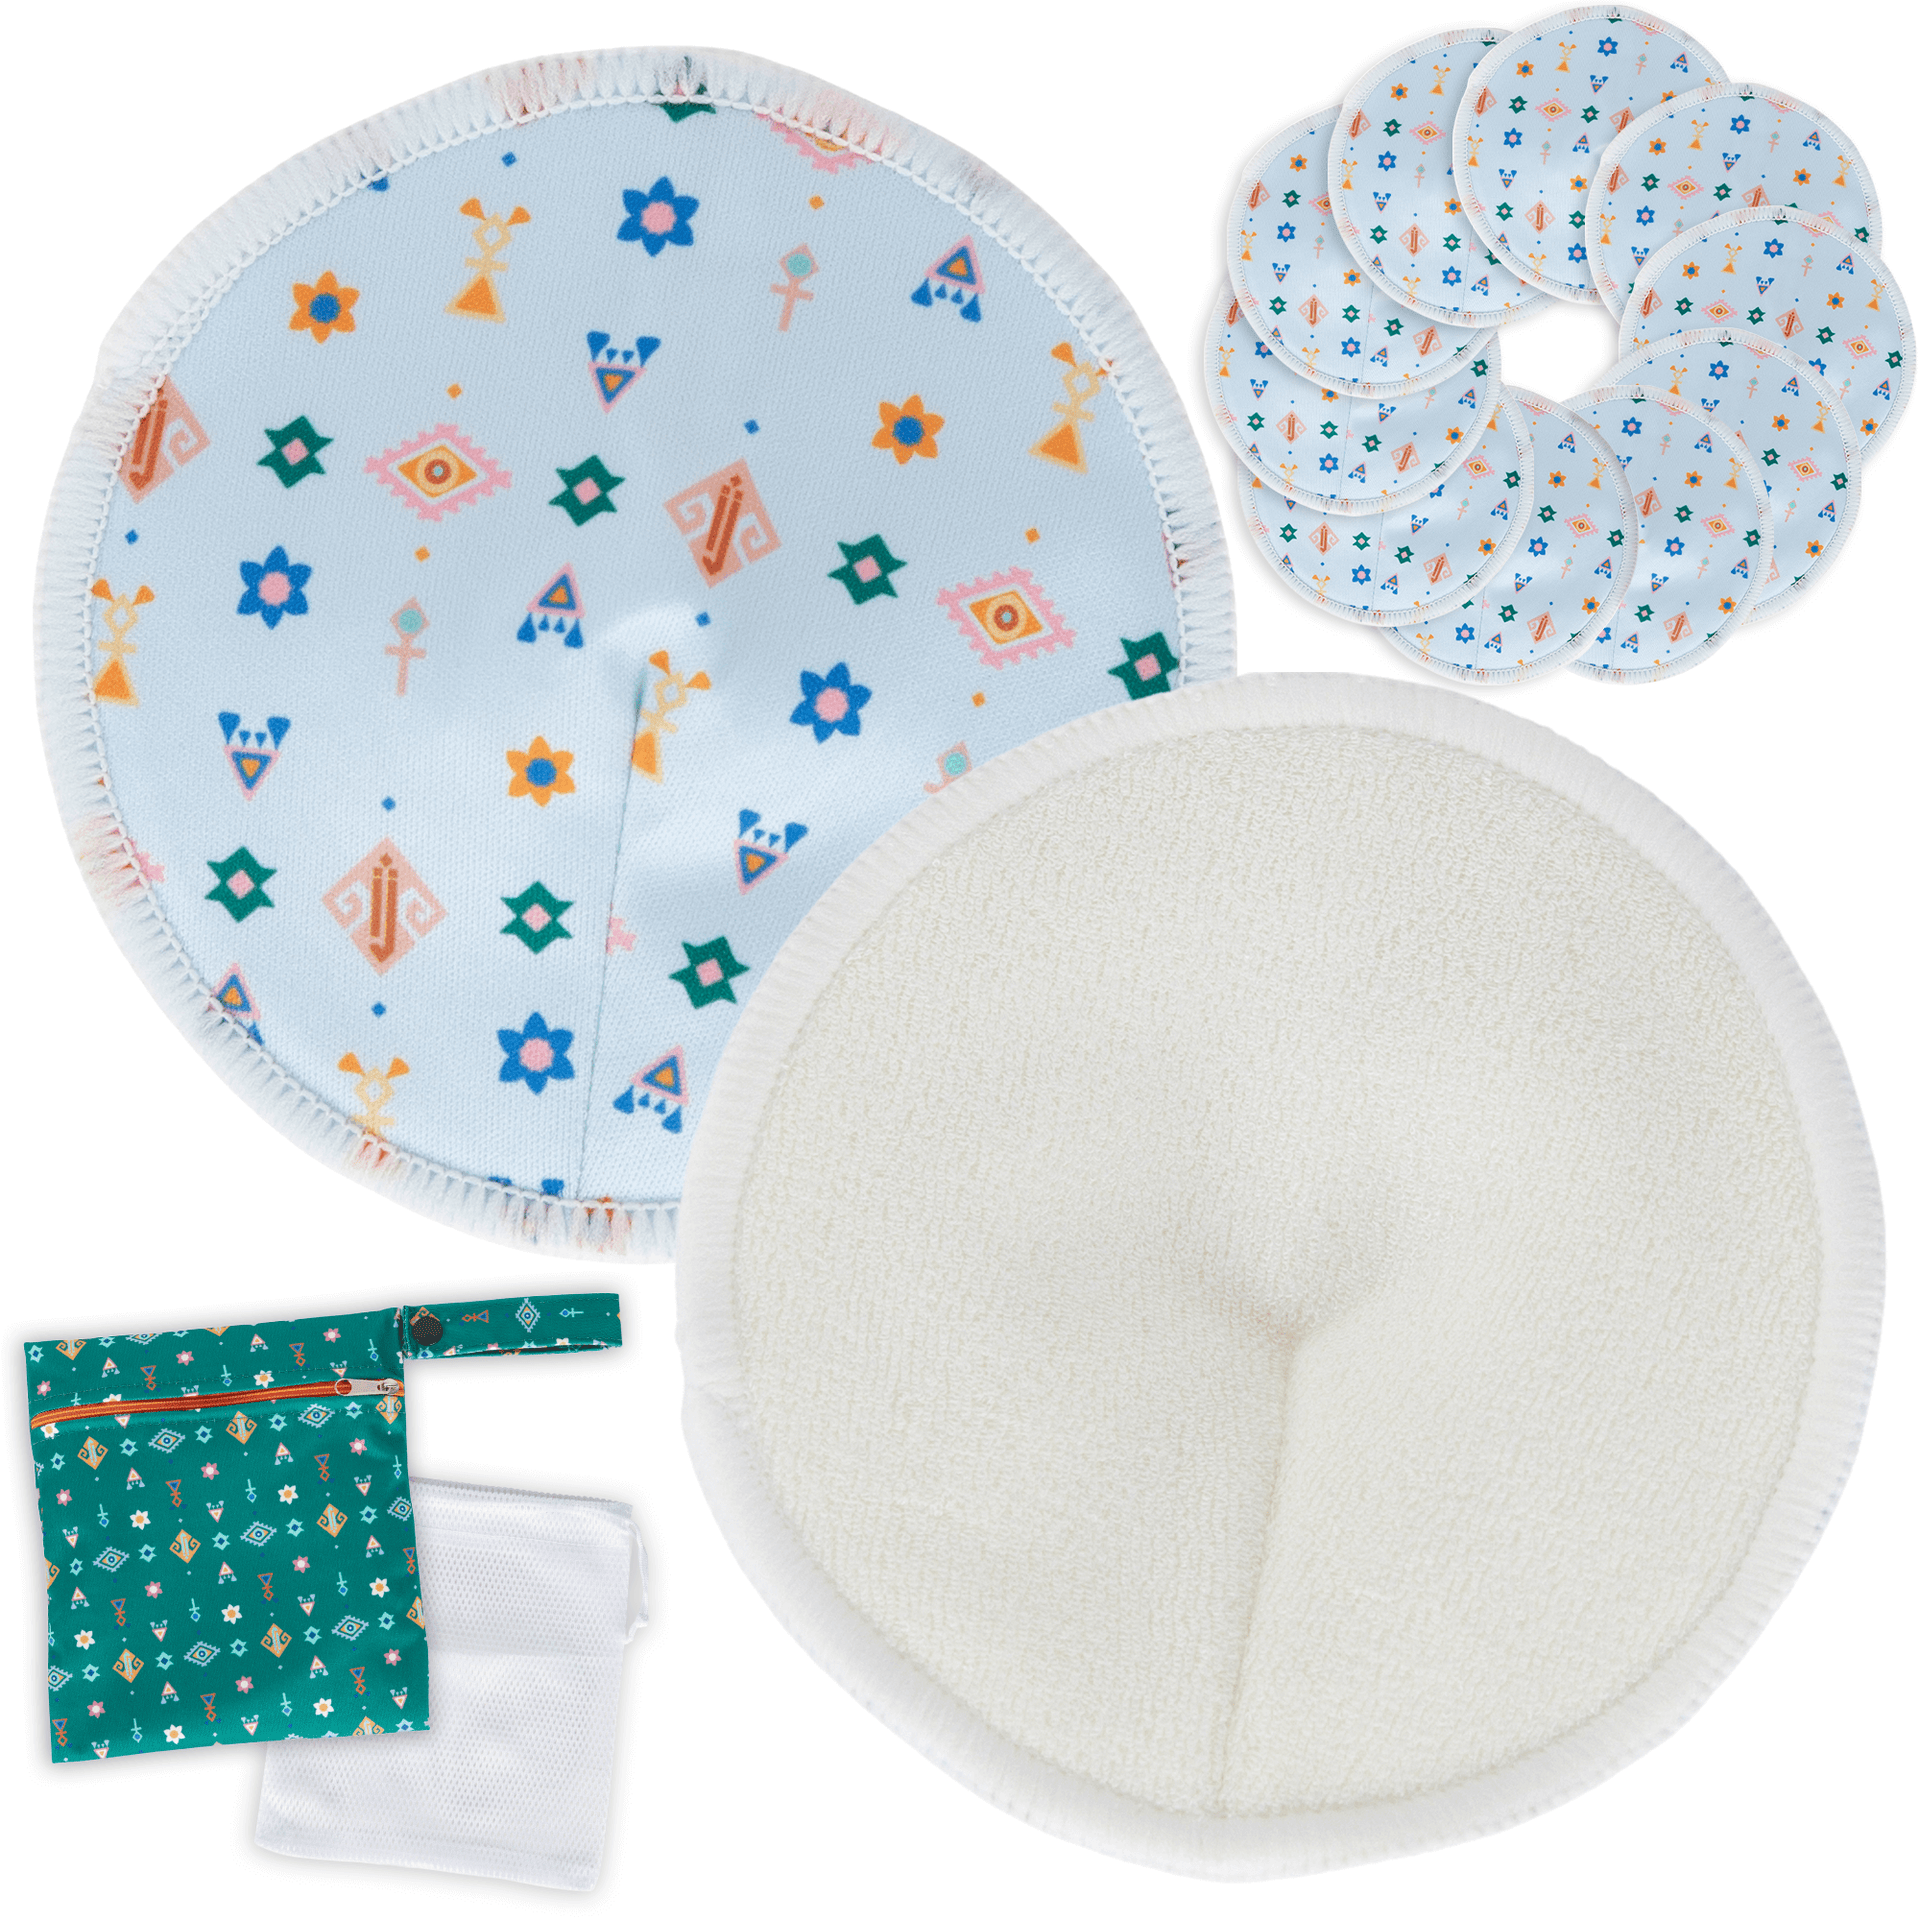 Organic Cotton Disposable Nursing Pads - for Breastfeeding (2 Boxes - 200  Pads)